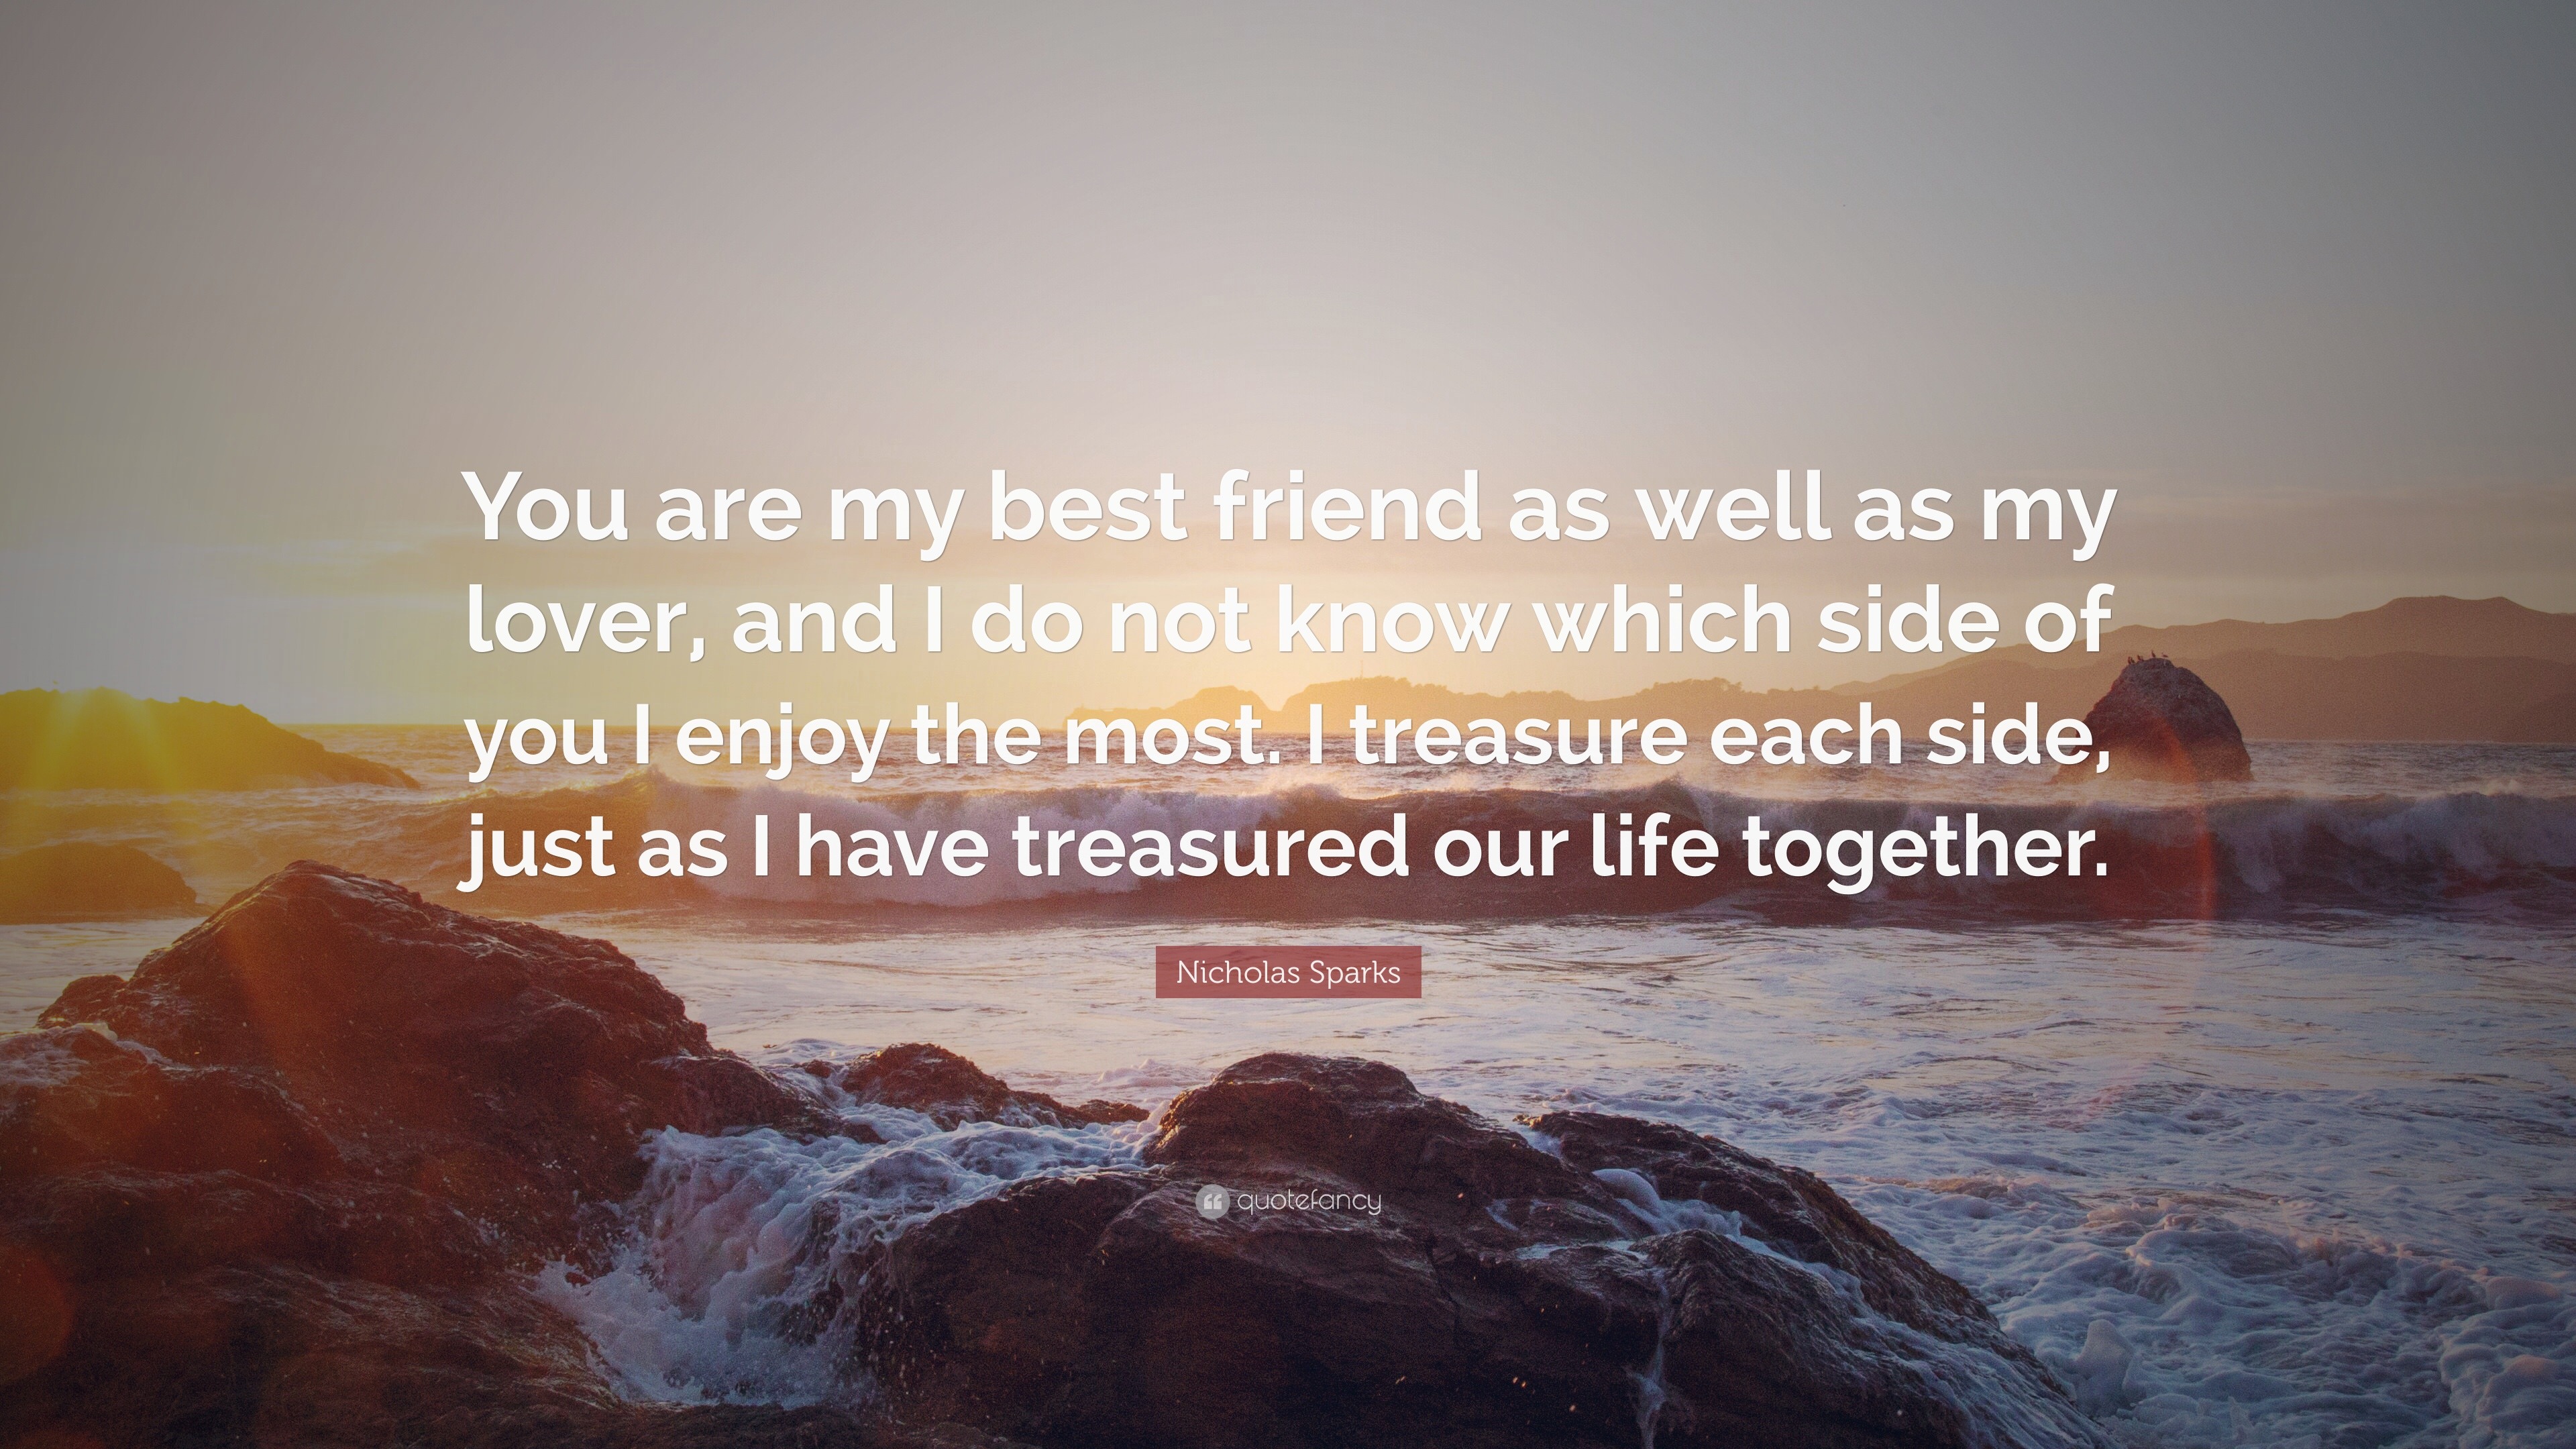 Love Quotes - “You are my best friend as well as my lover